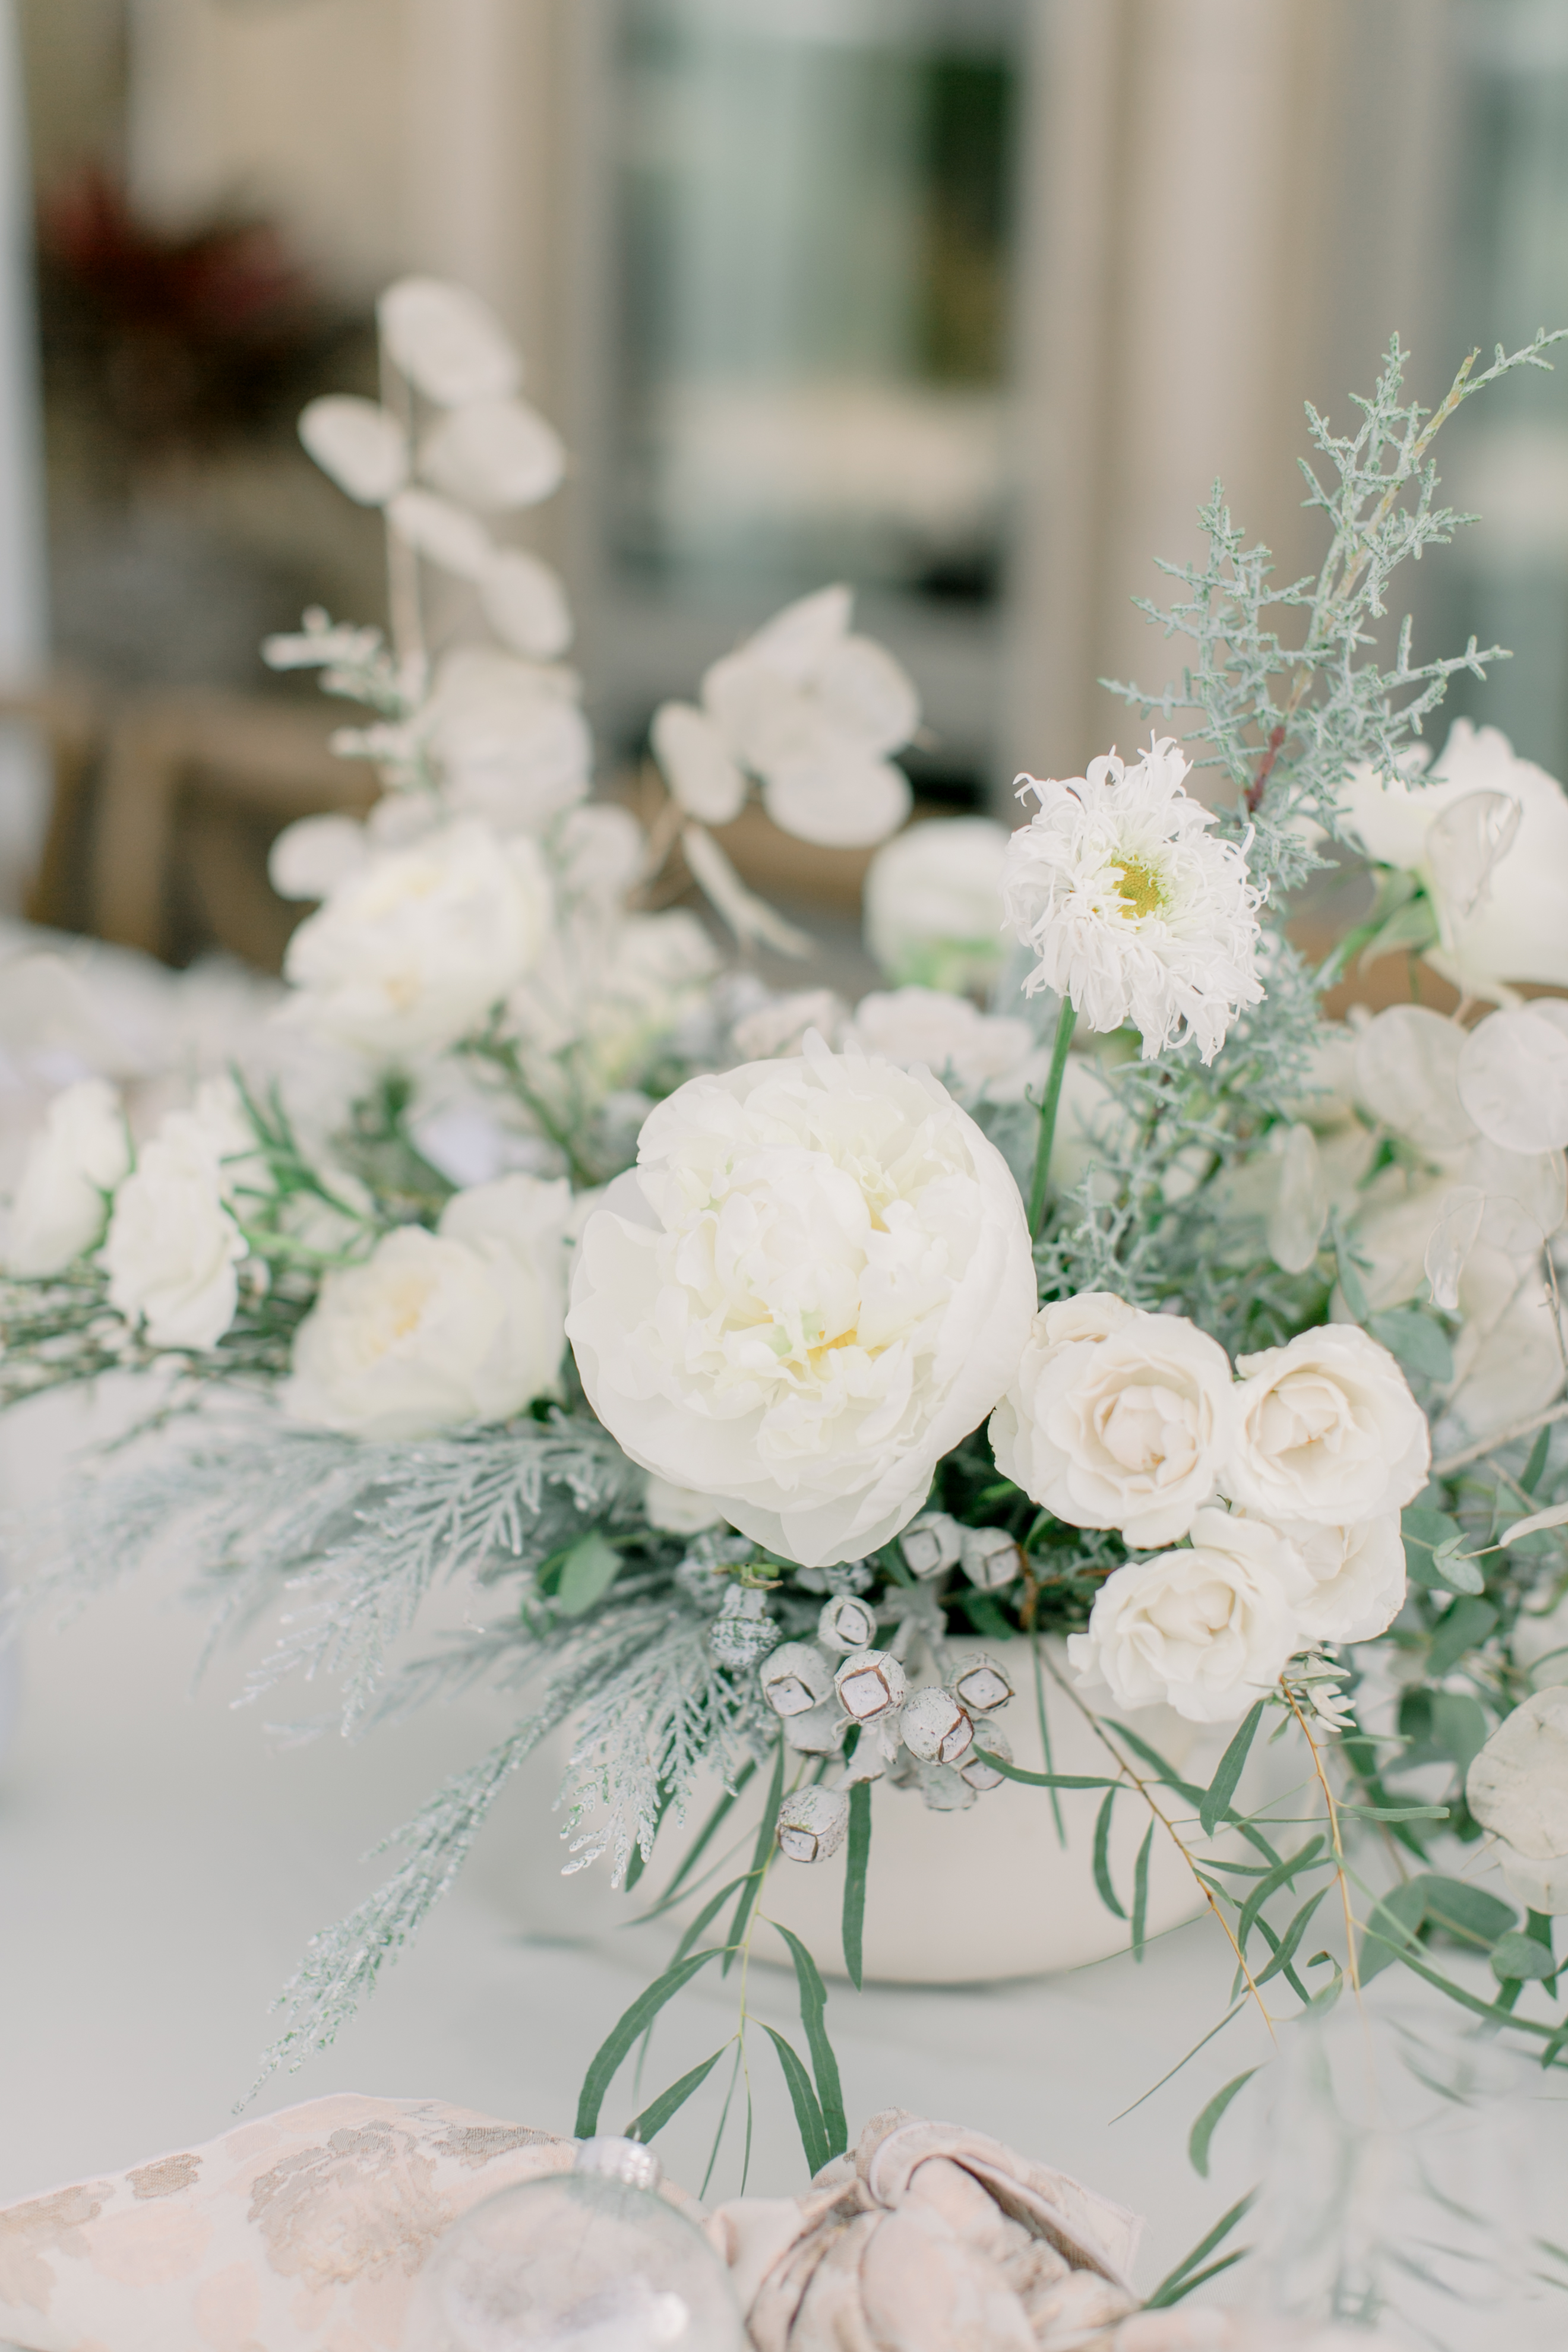 25 Bridal Shower Centerpieces the Bride-to-Be Will Love | Martha